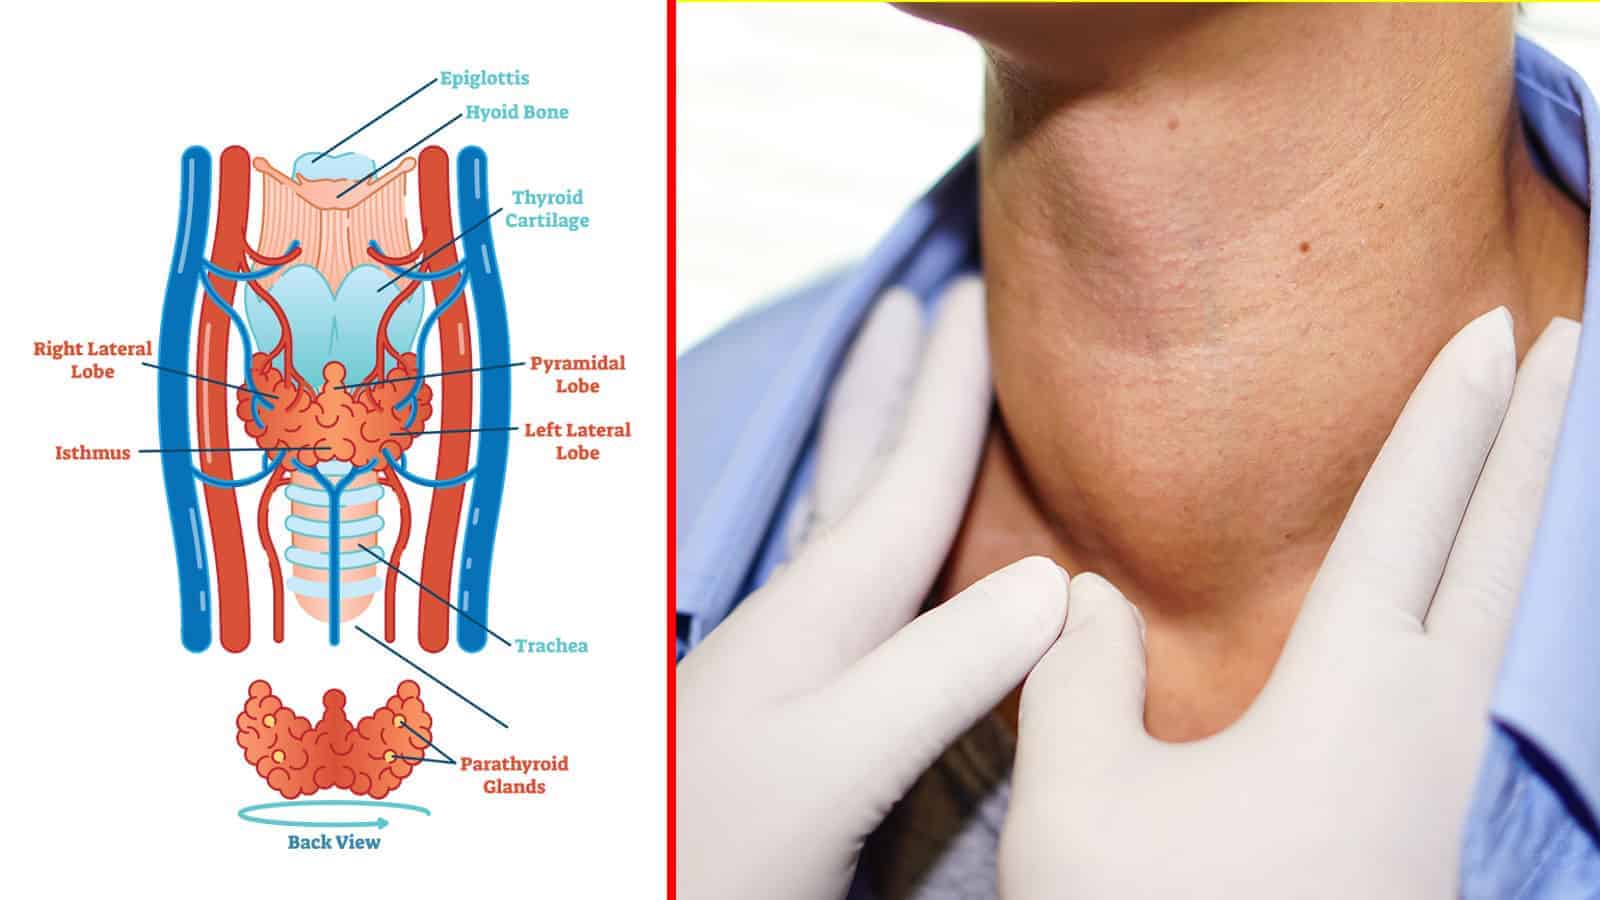 10 Signs of Thyroid Cancer That Most People Miss